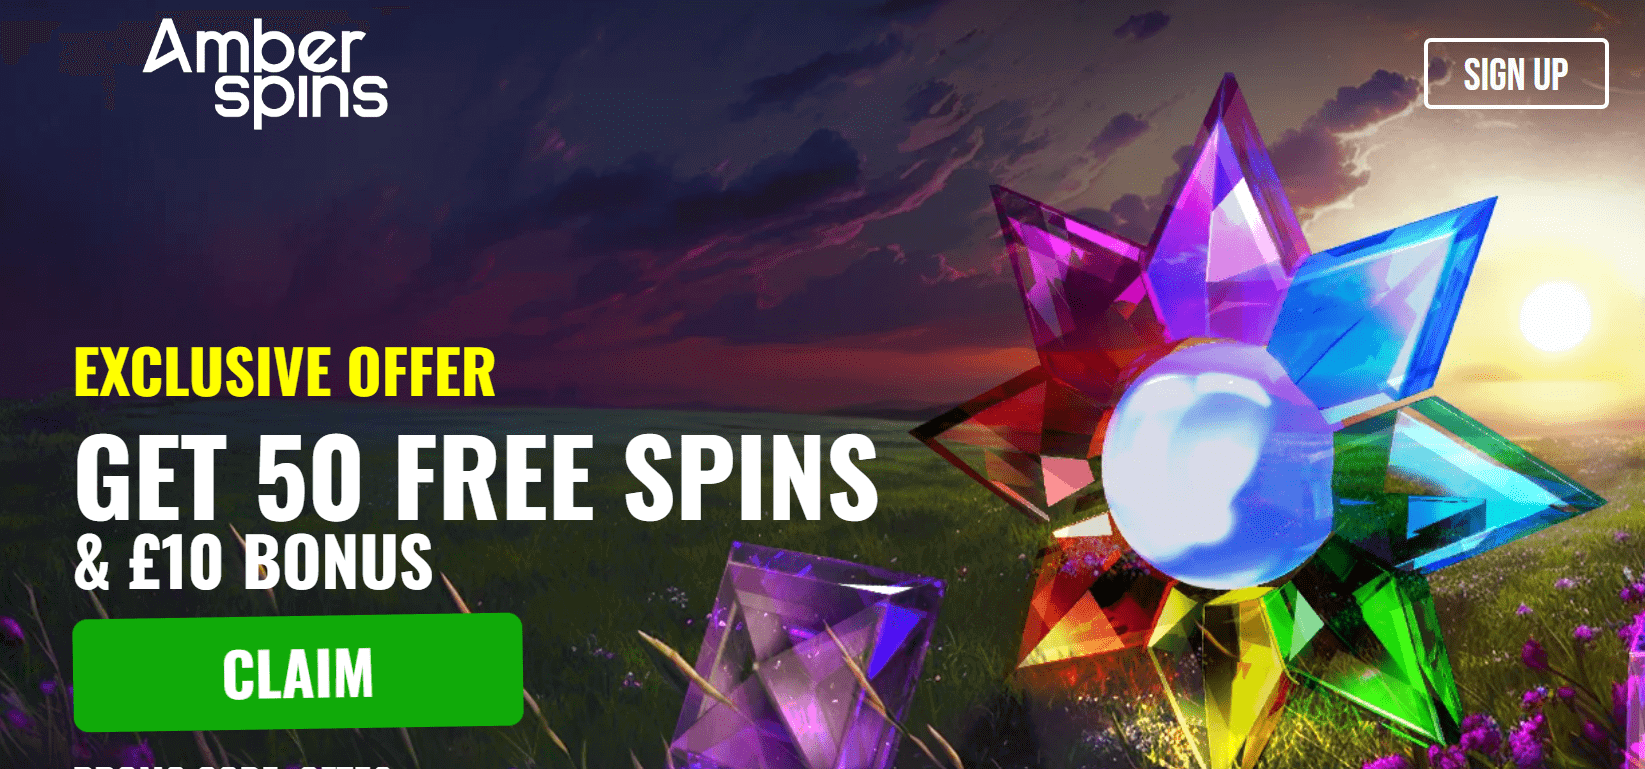 amber spins exclusive offer